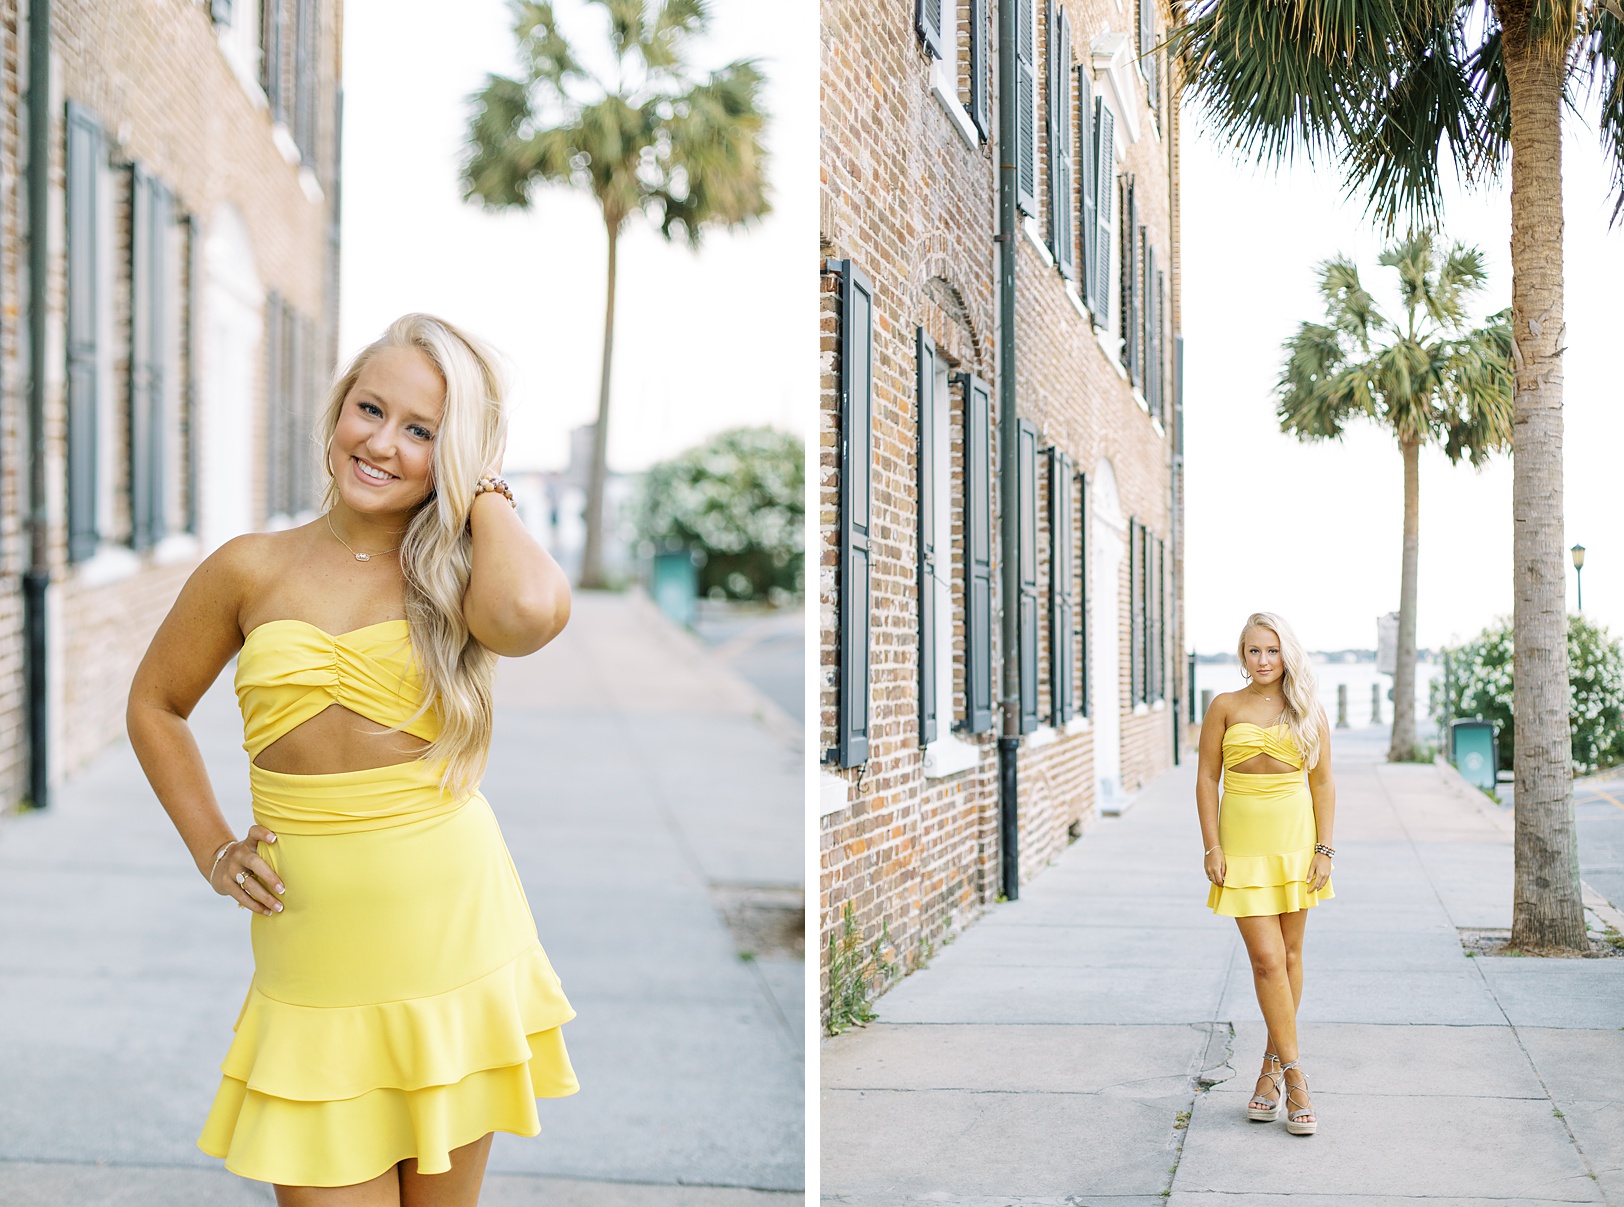 Senior Pictures Outfit Ideas, yellow dress | Kaitlin Scott Photography